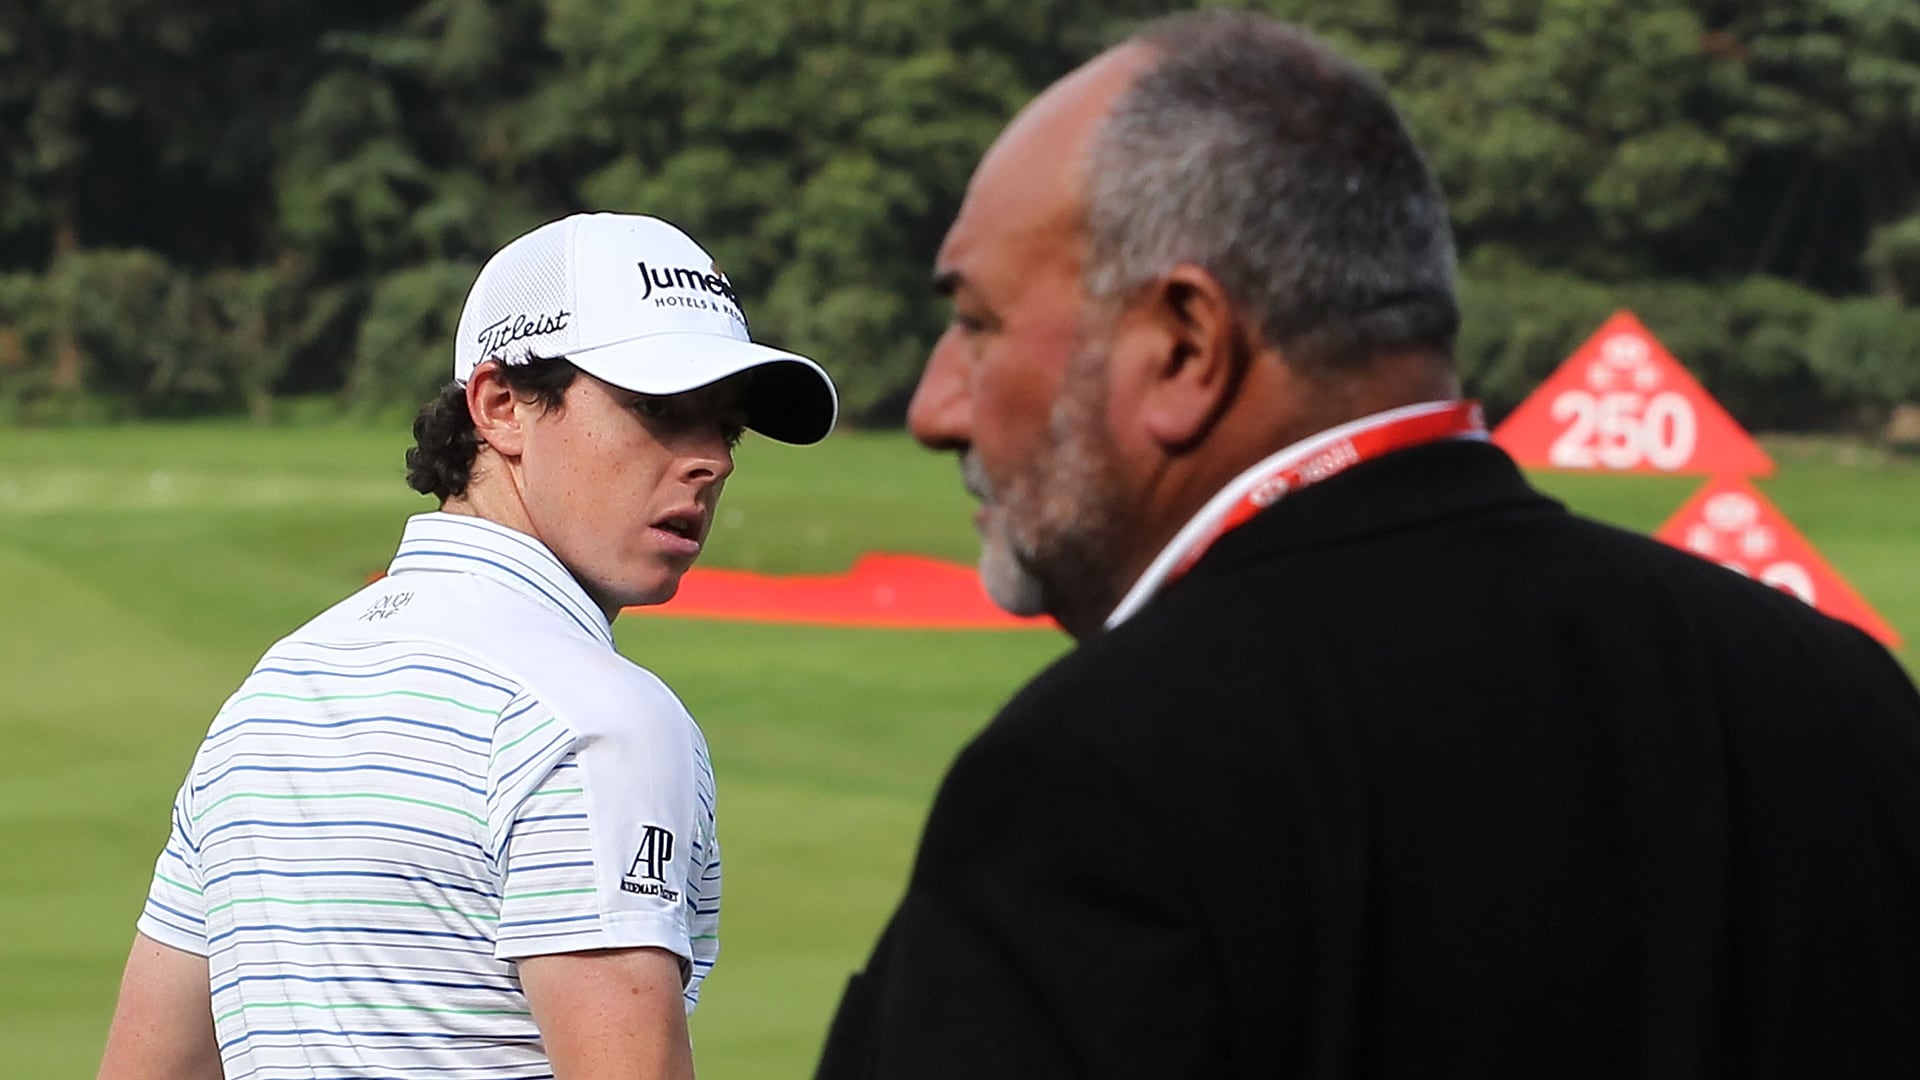 Will Rory McIlroy ever win Masters? Don’t bet on it, says former manager